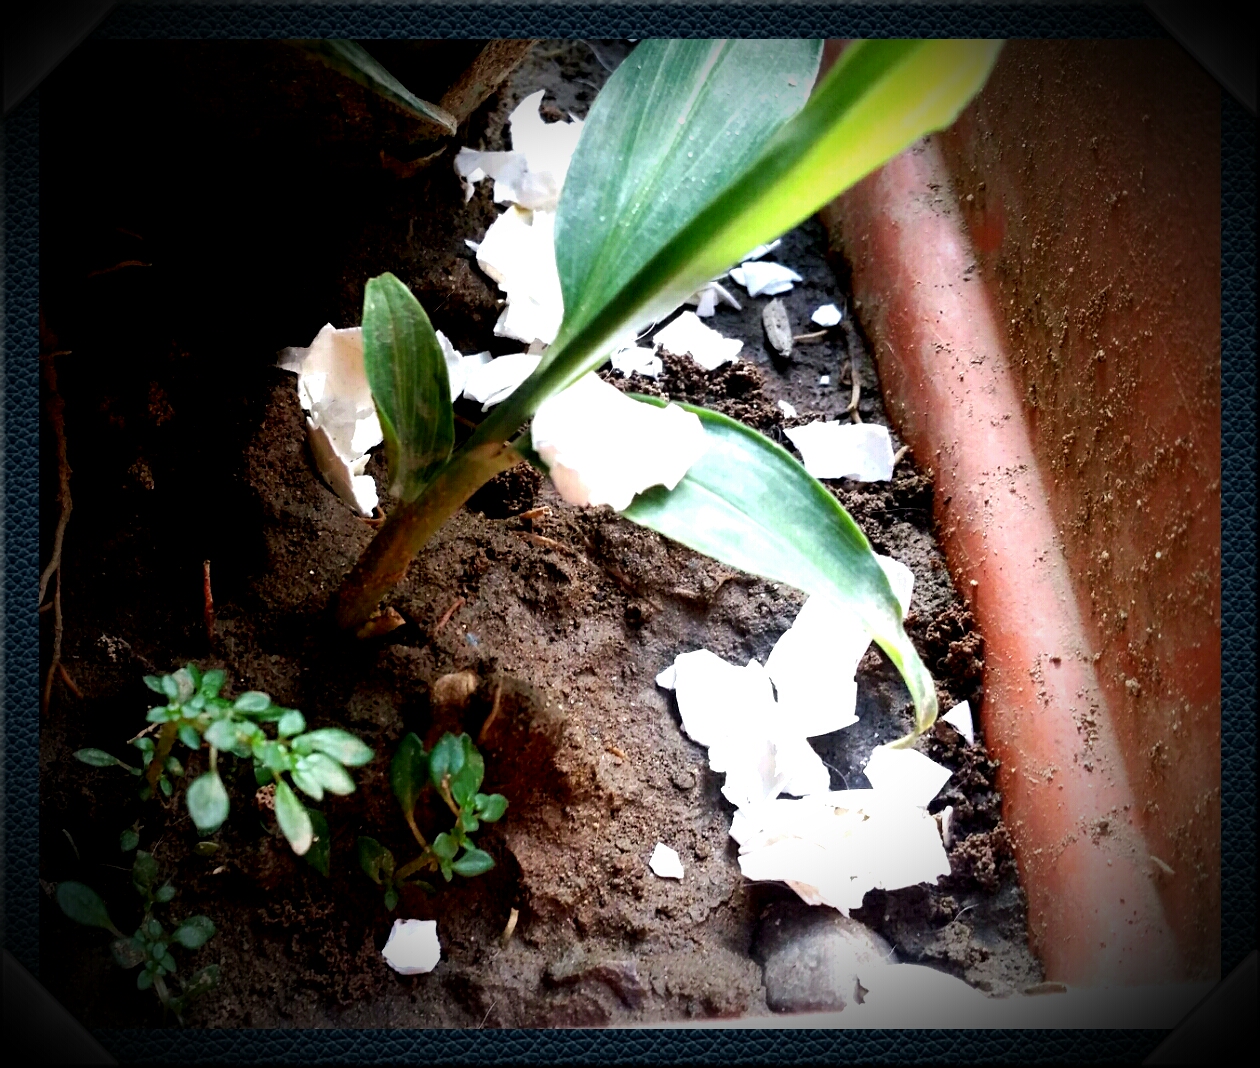 with egg shells  plus the ginger leaves sprouting